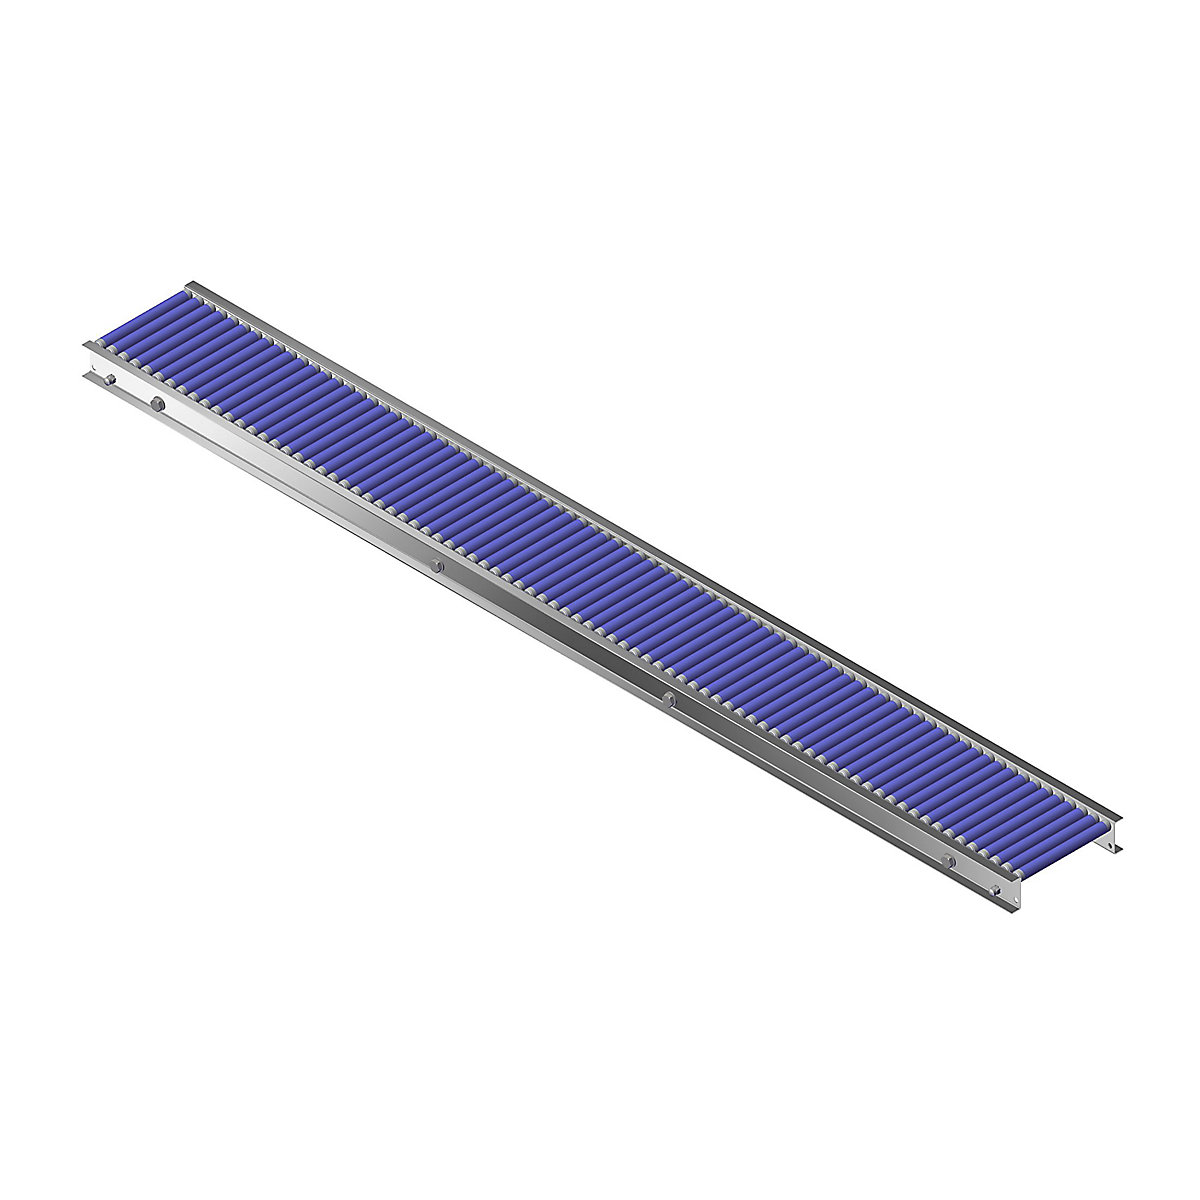 Gura – Small roller conveyor, aluminium frame with plastic rollers, track width 200 mm, axle spacing 25 mm, length 2.0 m